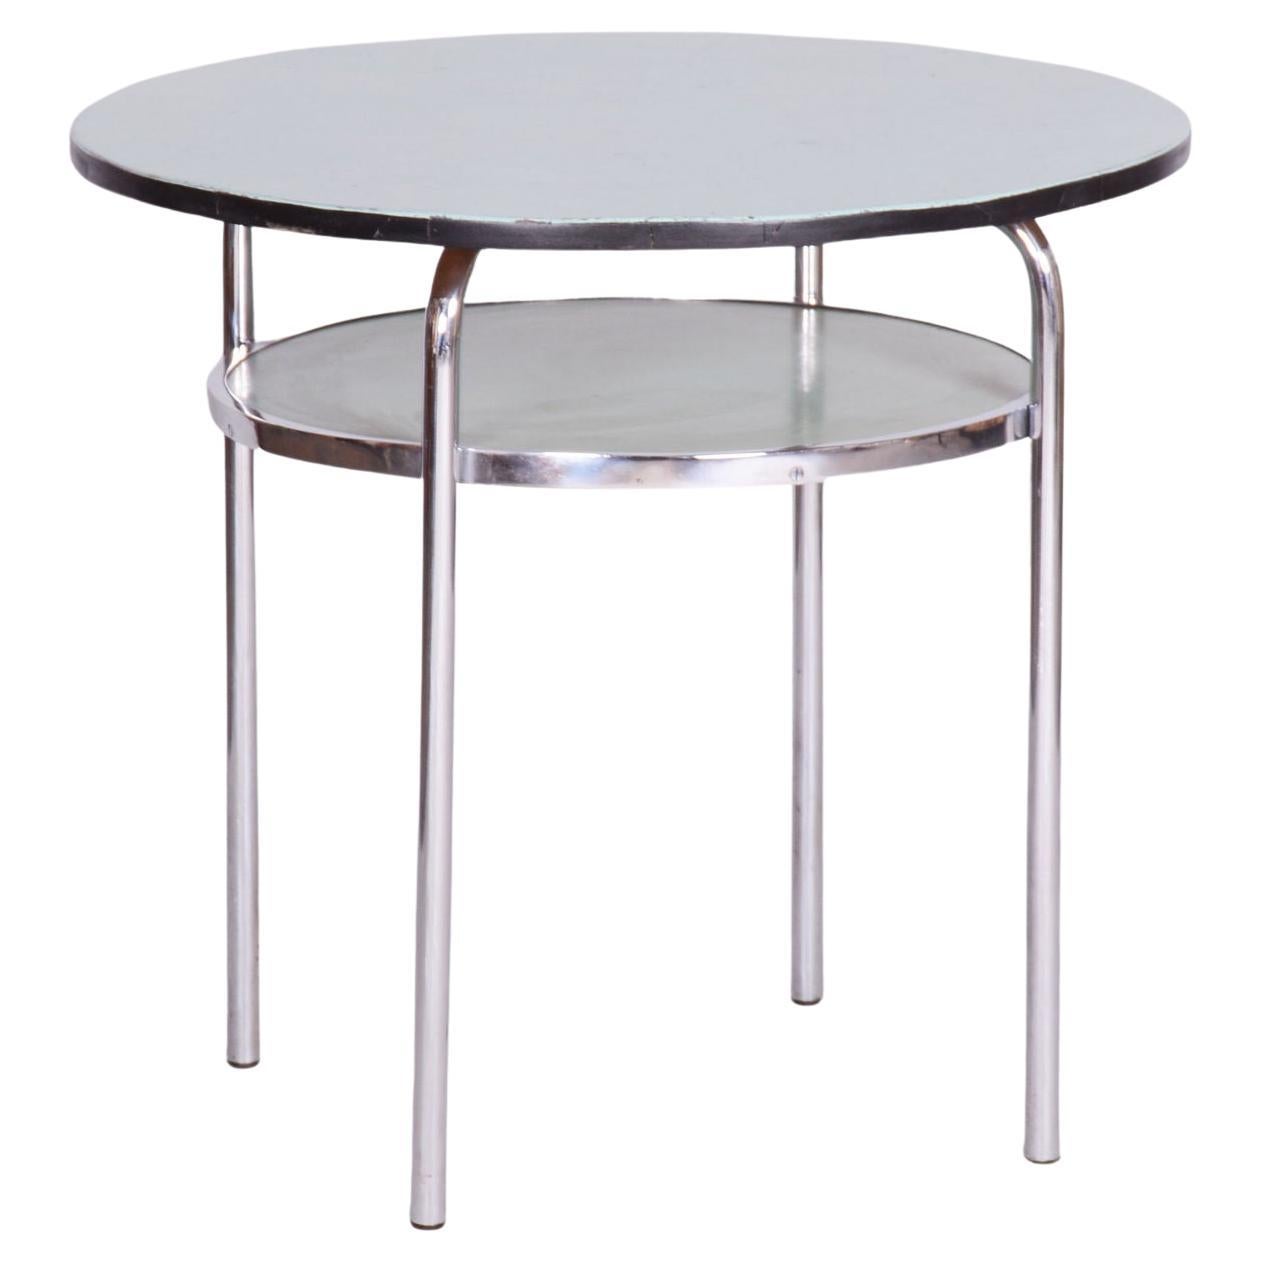 Restored Bauhaus Small Round Table, Chrome, Revived Polish, Czechia, 1930s For Sale